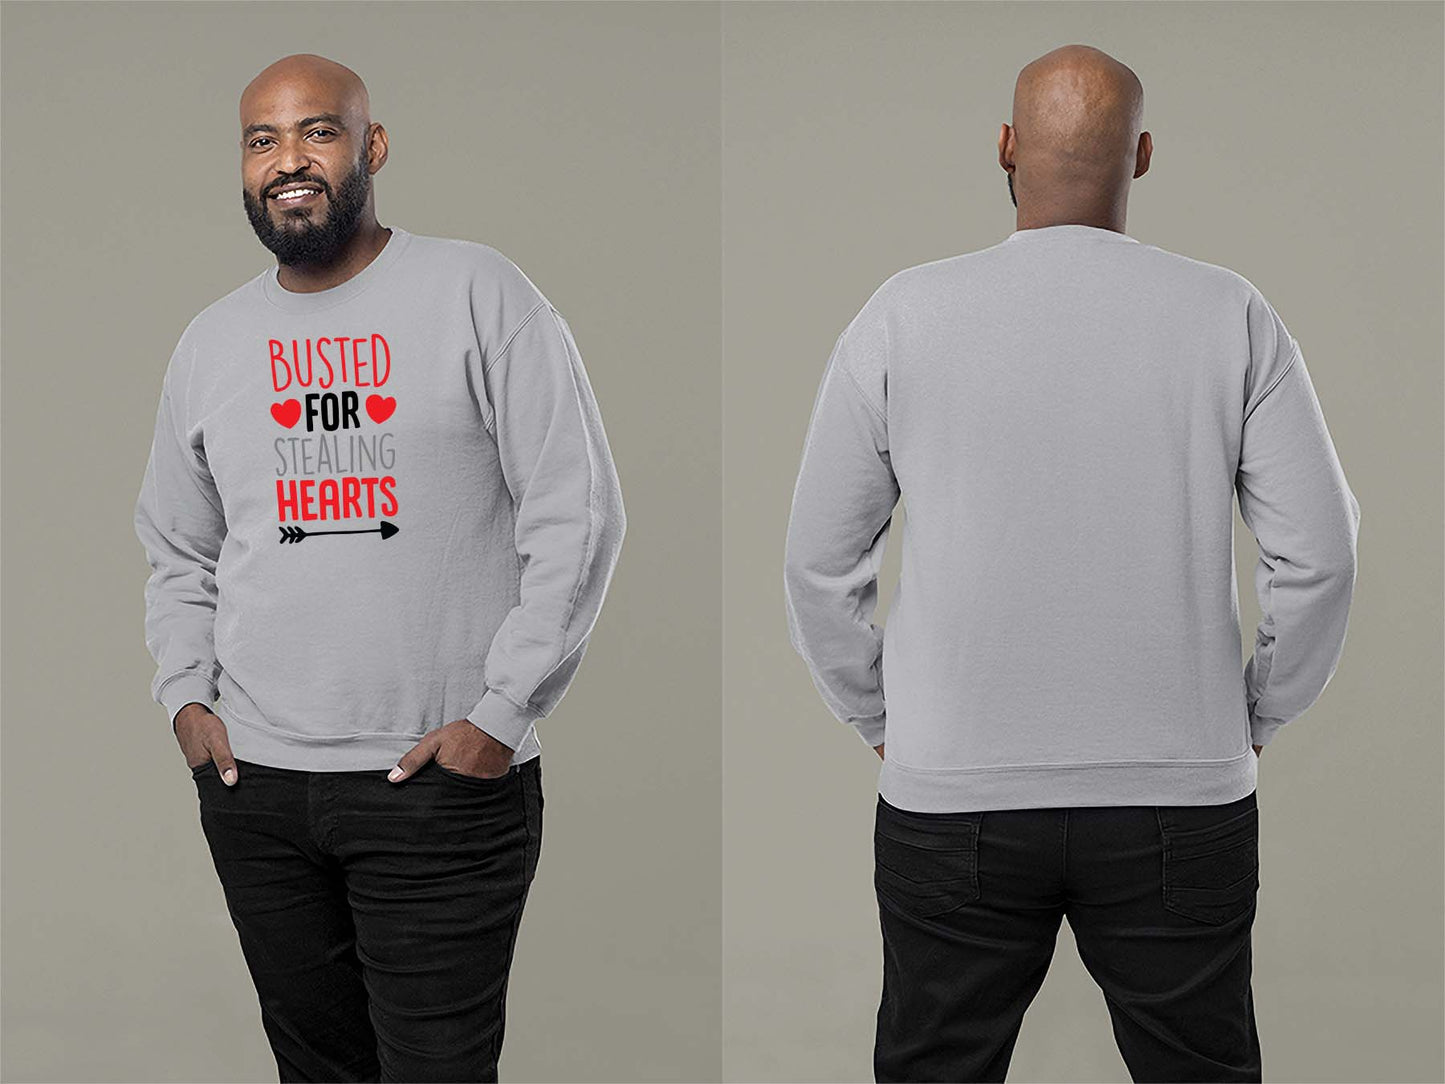 Fat Dave Busted For Stealing Hearts Sweatshirt Small Sport Grey